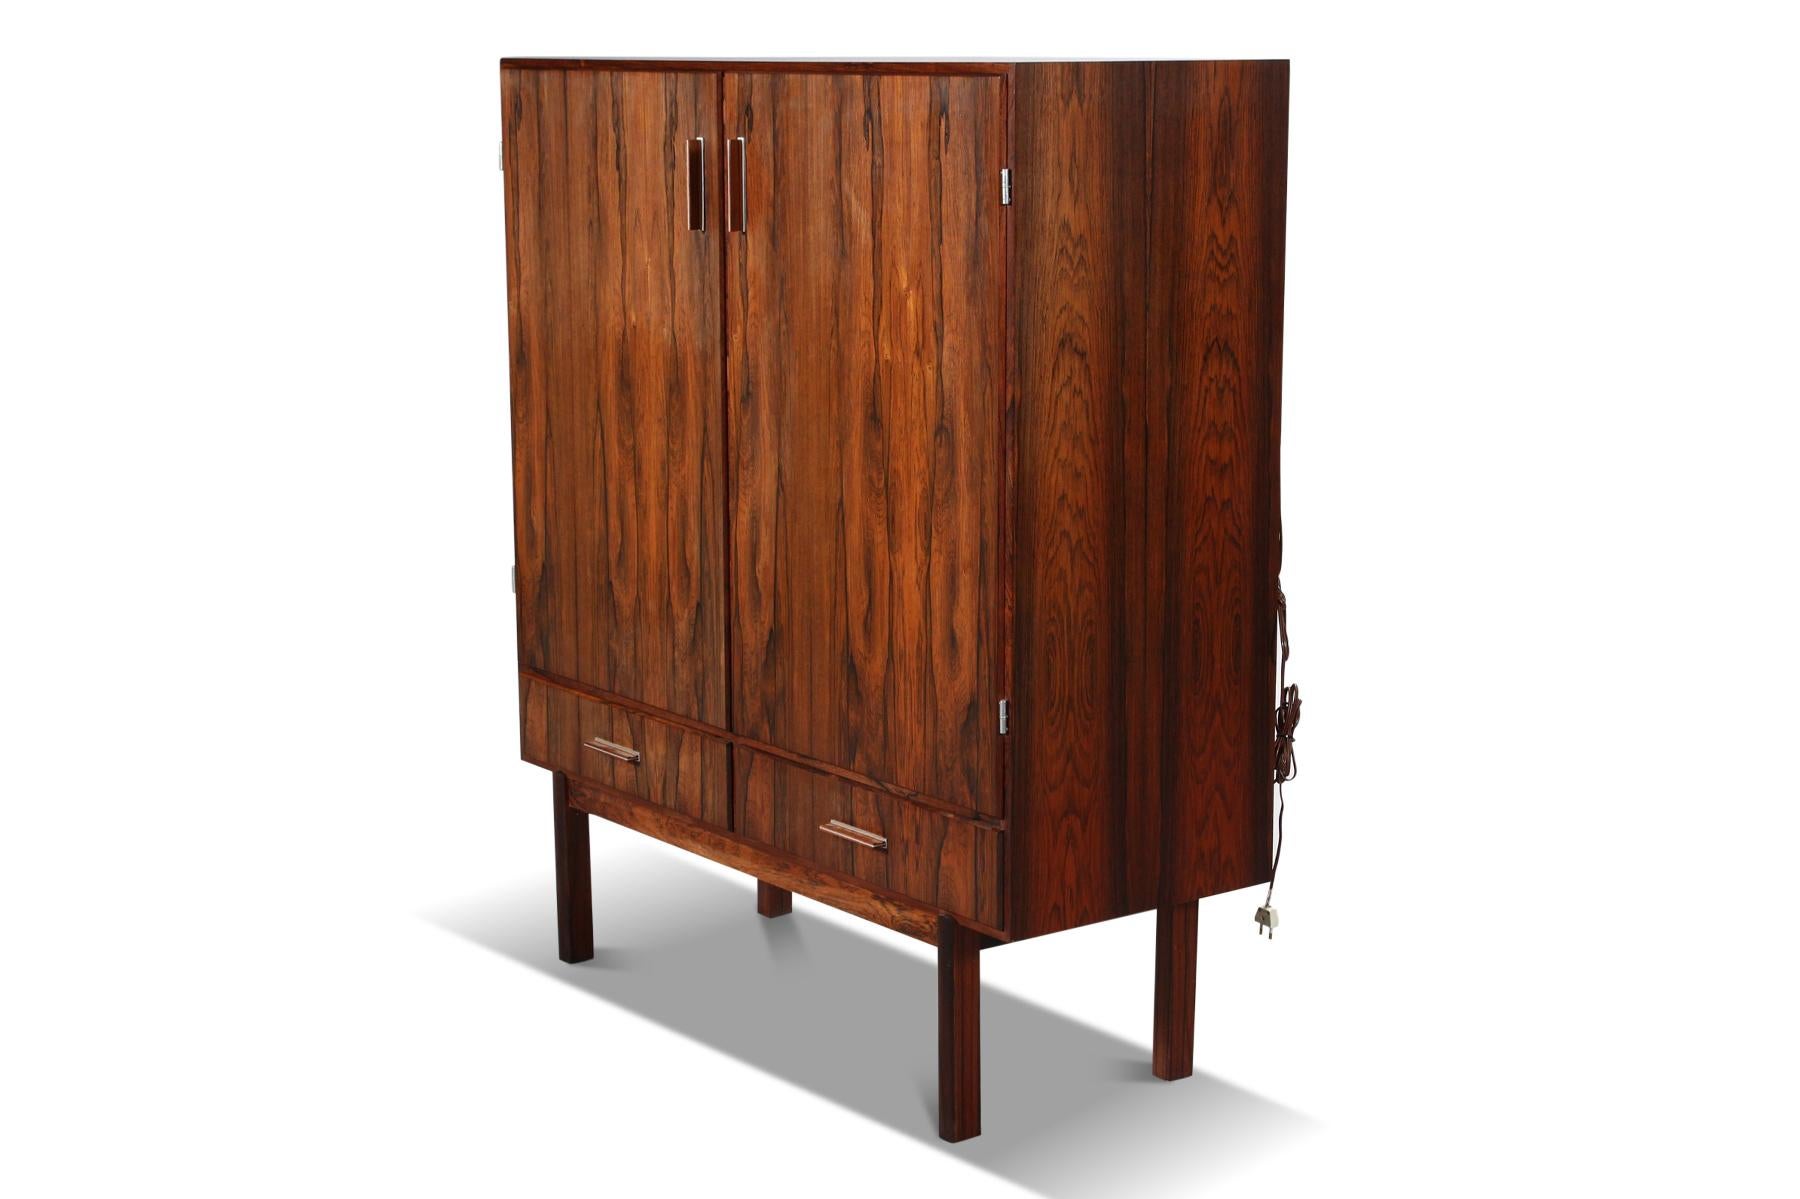 Origin: Denmark
Designer: Axel Christiansen
Manufacturer: ACO Møbler
Era: 1960s
Materials: Rosewood
Measurements: 47.25? wide x 18? deep x 50? tall

Condition: In excellent original condition with typical wear for its vintage. Price includes